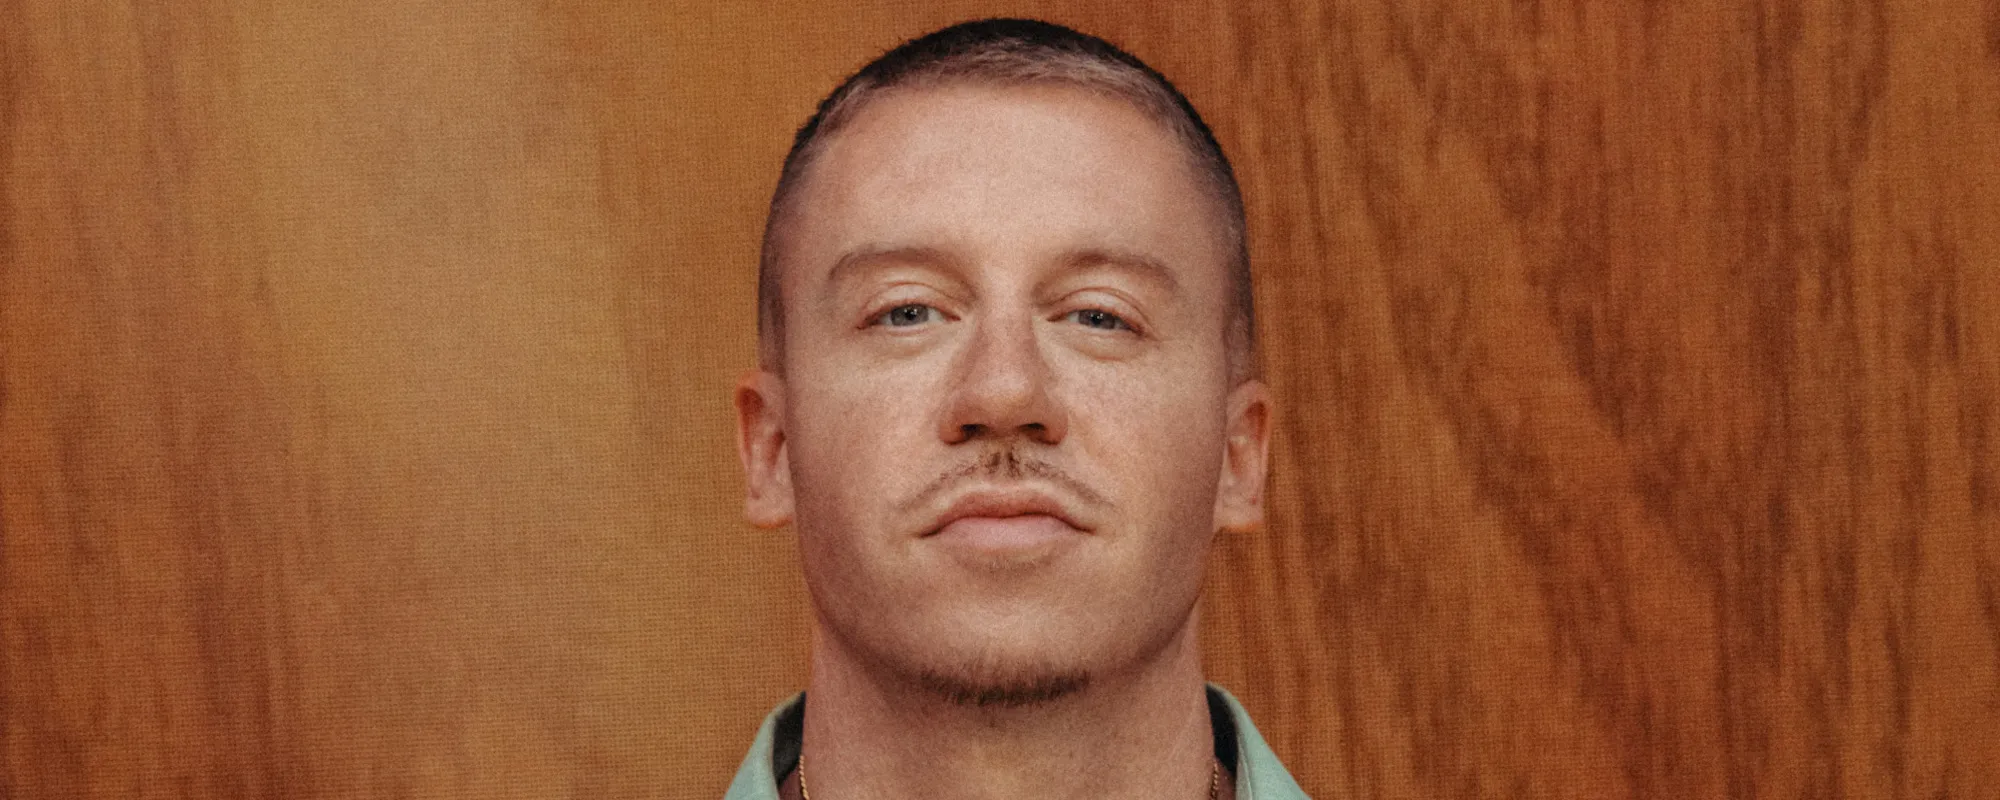 Macklemore Releases New Song, “Maniac” with Accompanying Music Video (Watch)